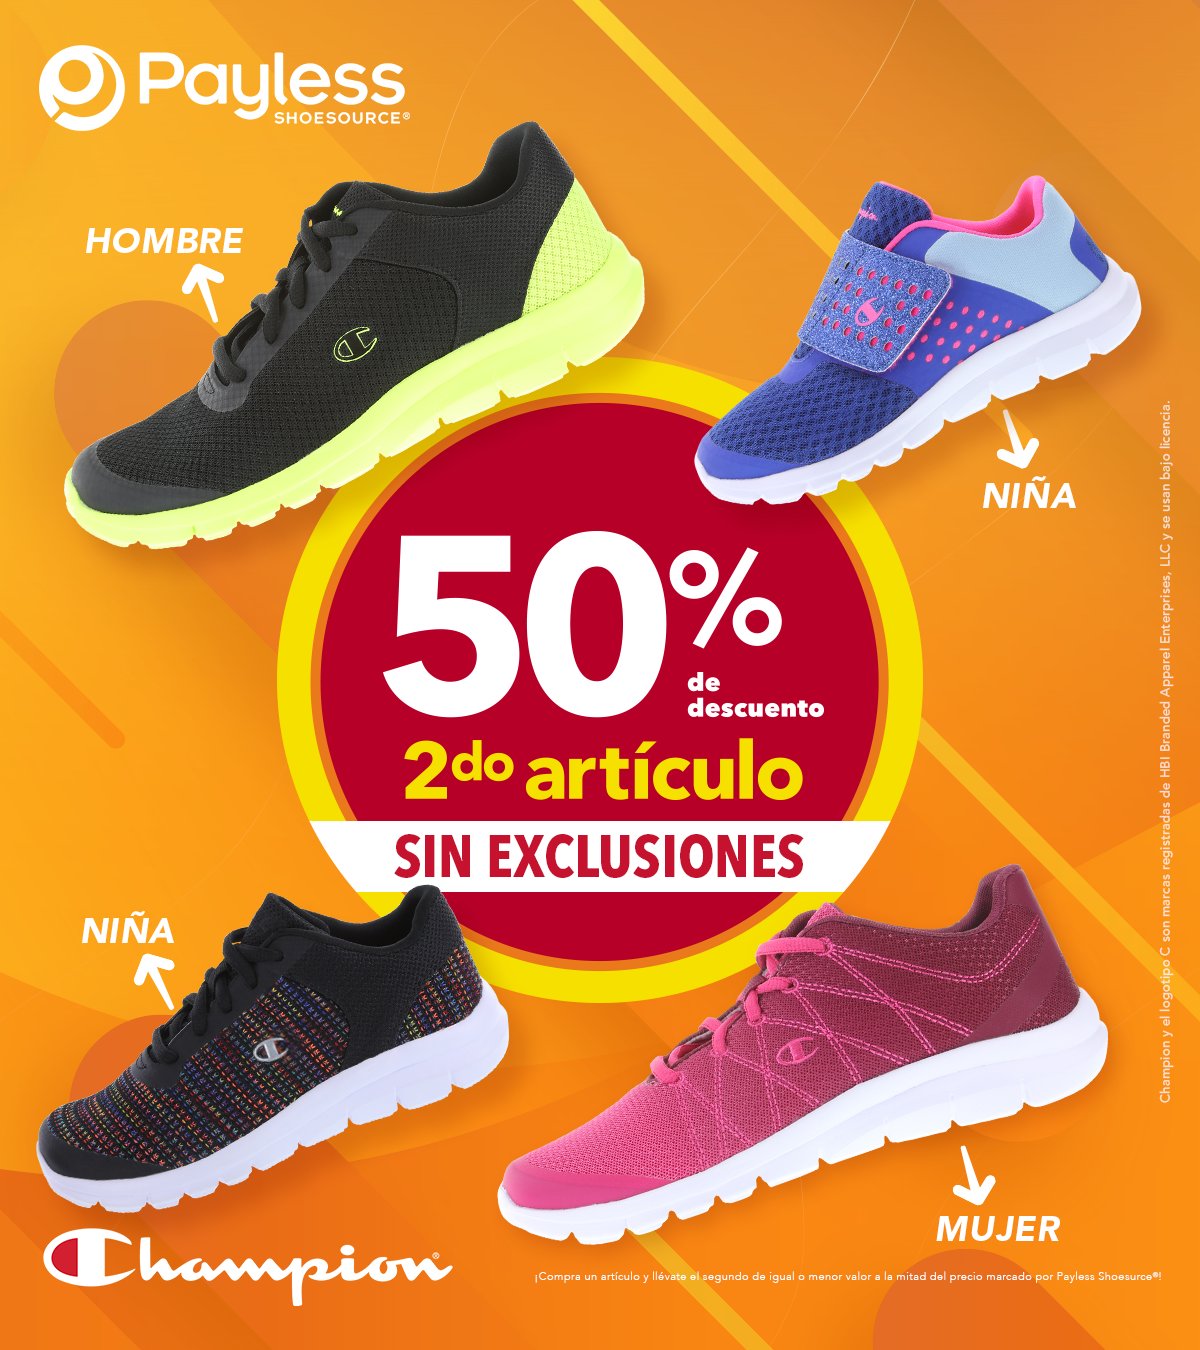 Introducir 94+ imagen payless shoes colombia